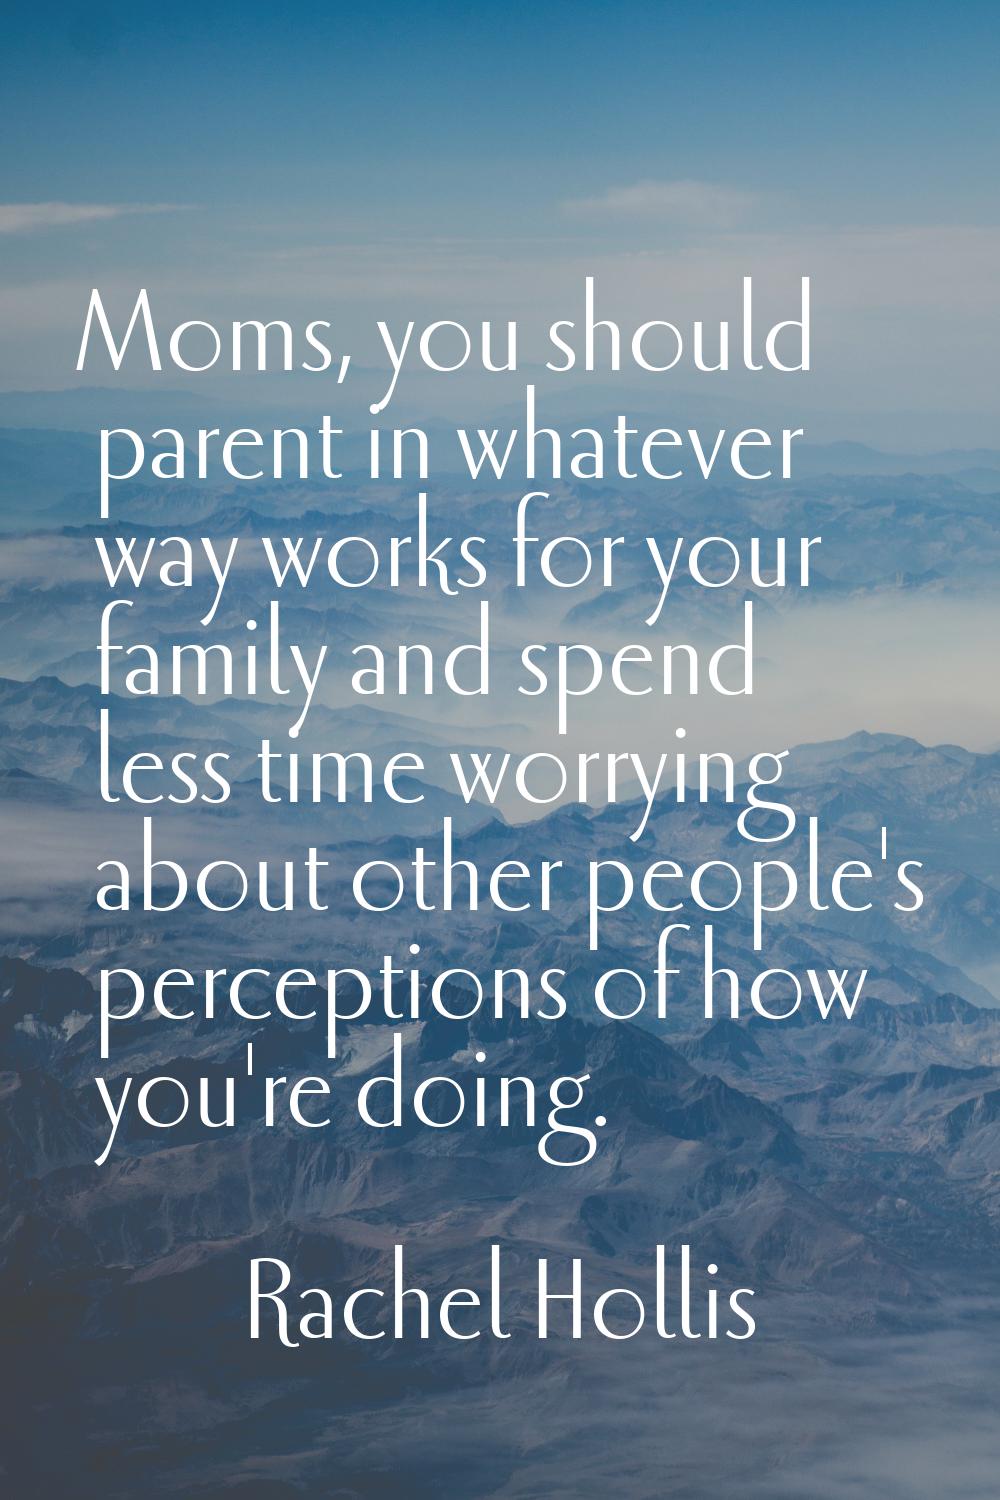 Moms, you should parent in whatever way works for your family and spend less time worrying about ot